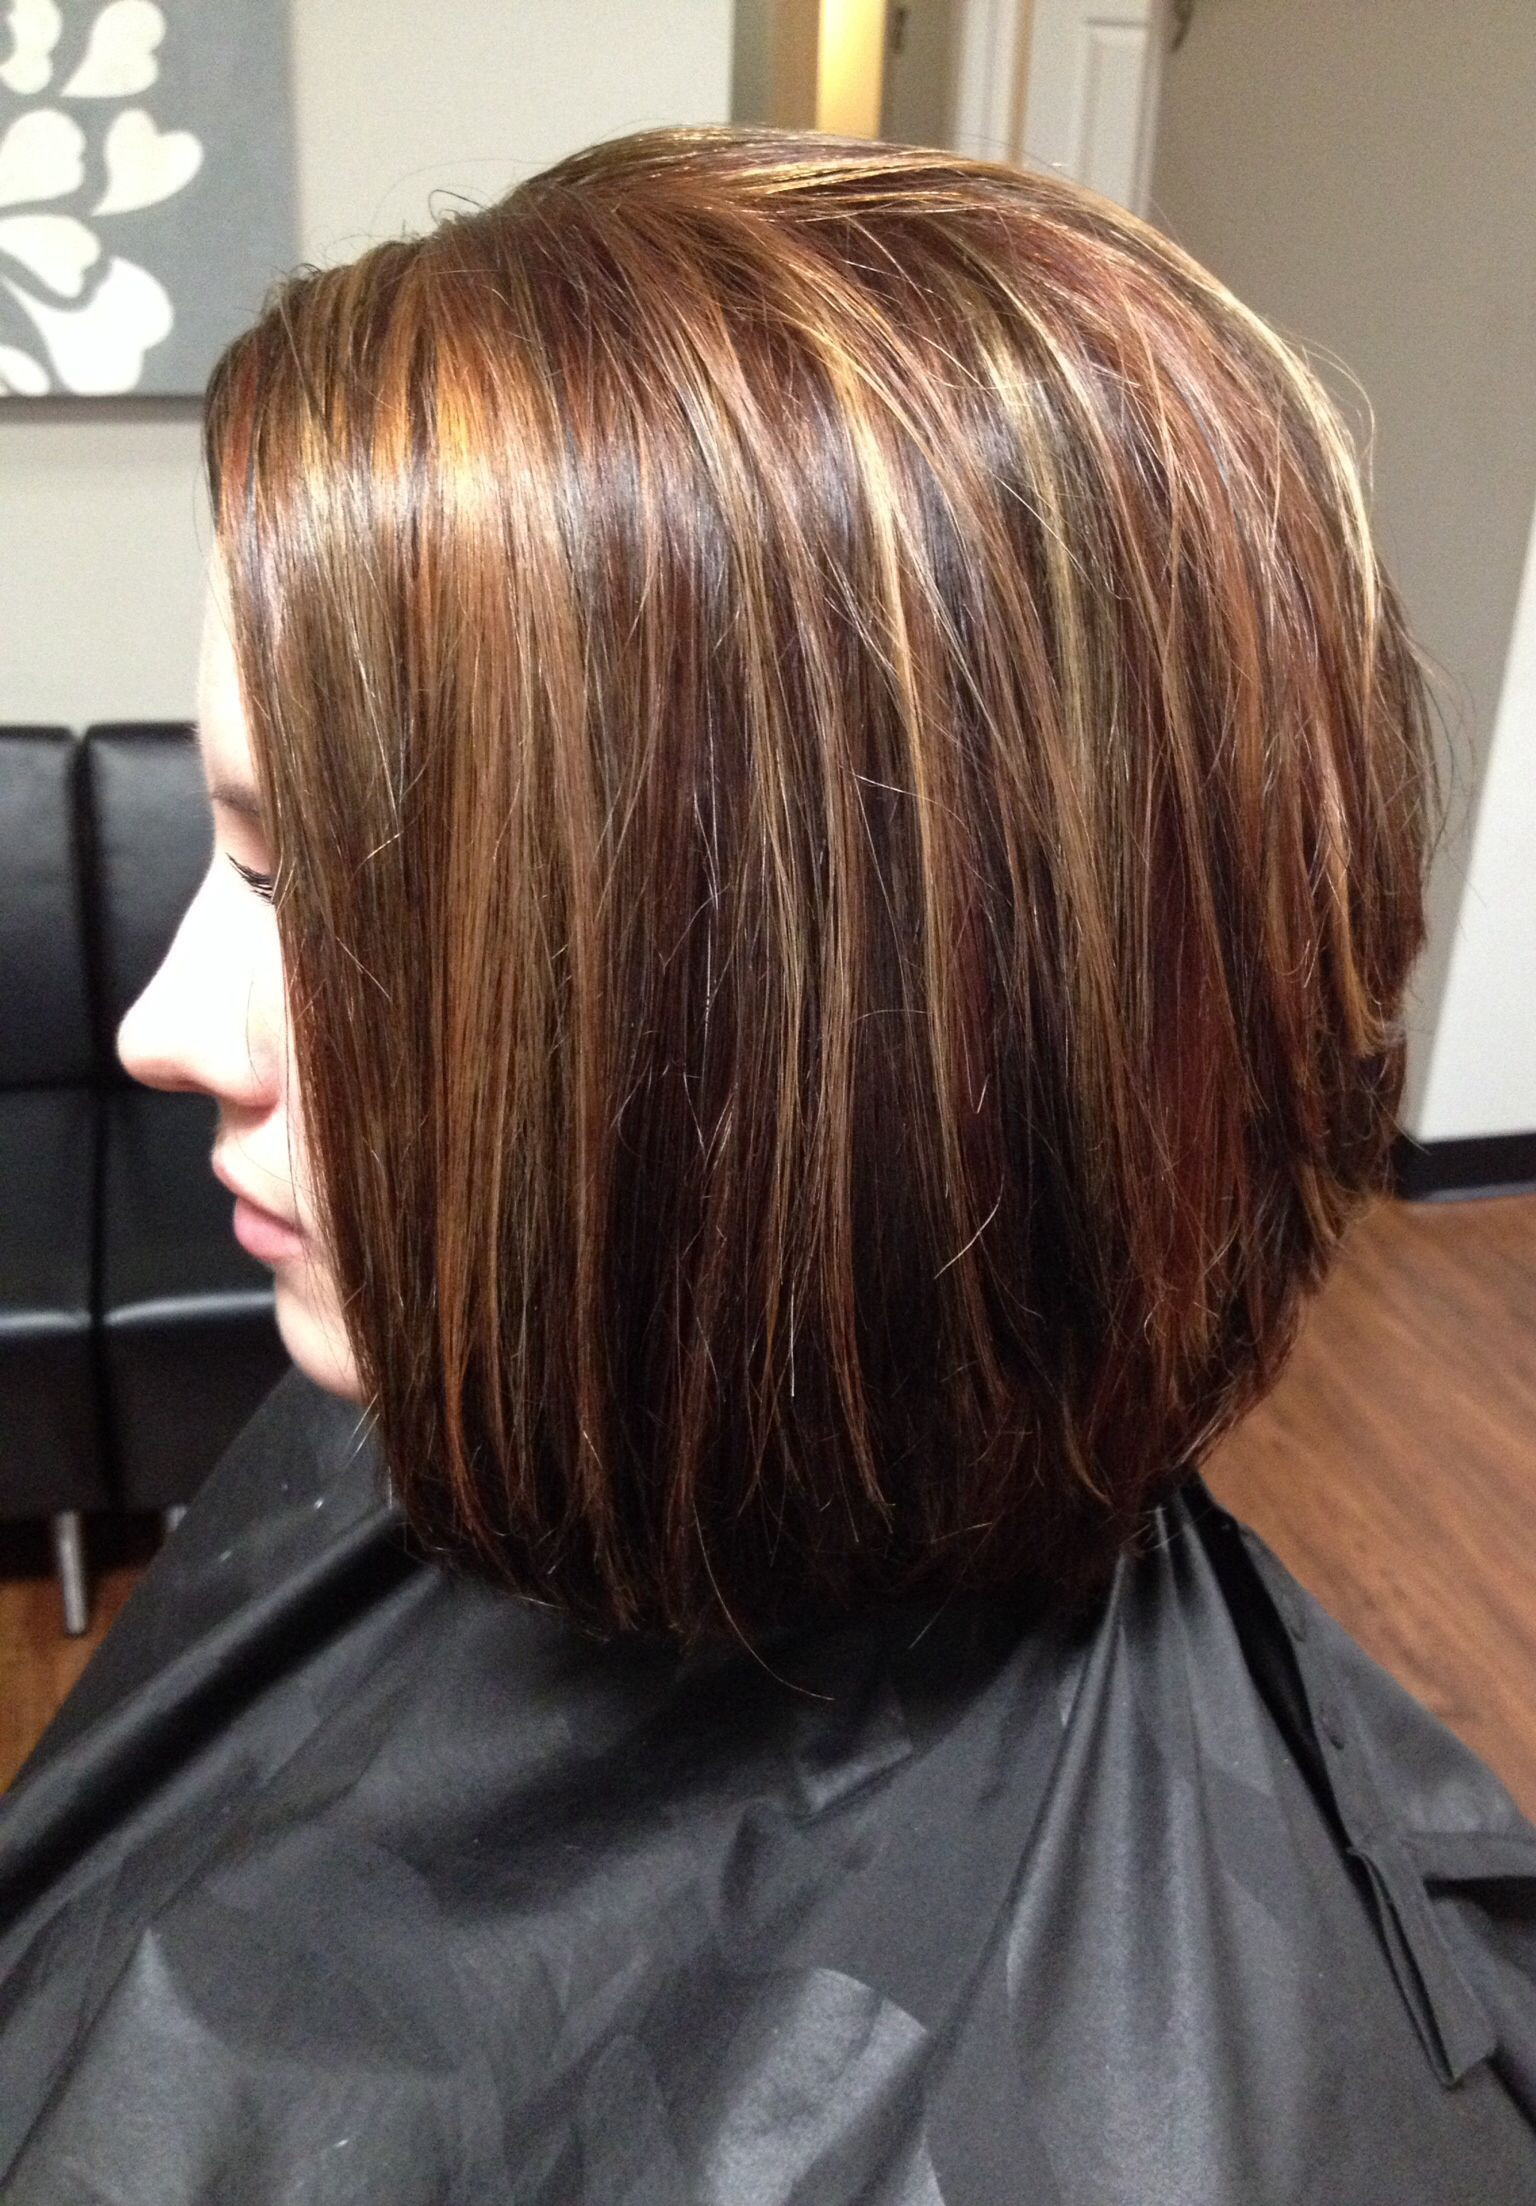 Bob Hairstyles With Highlights And Lowlights
 Hair color lowlights and highlights cut stacked in the